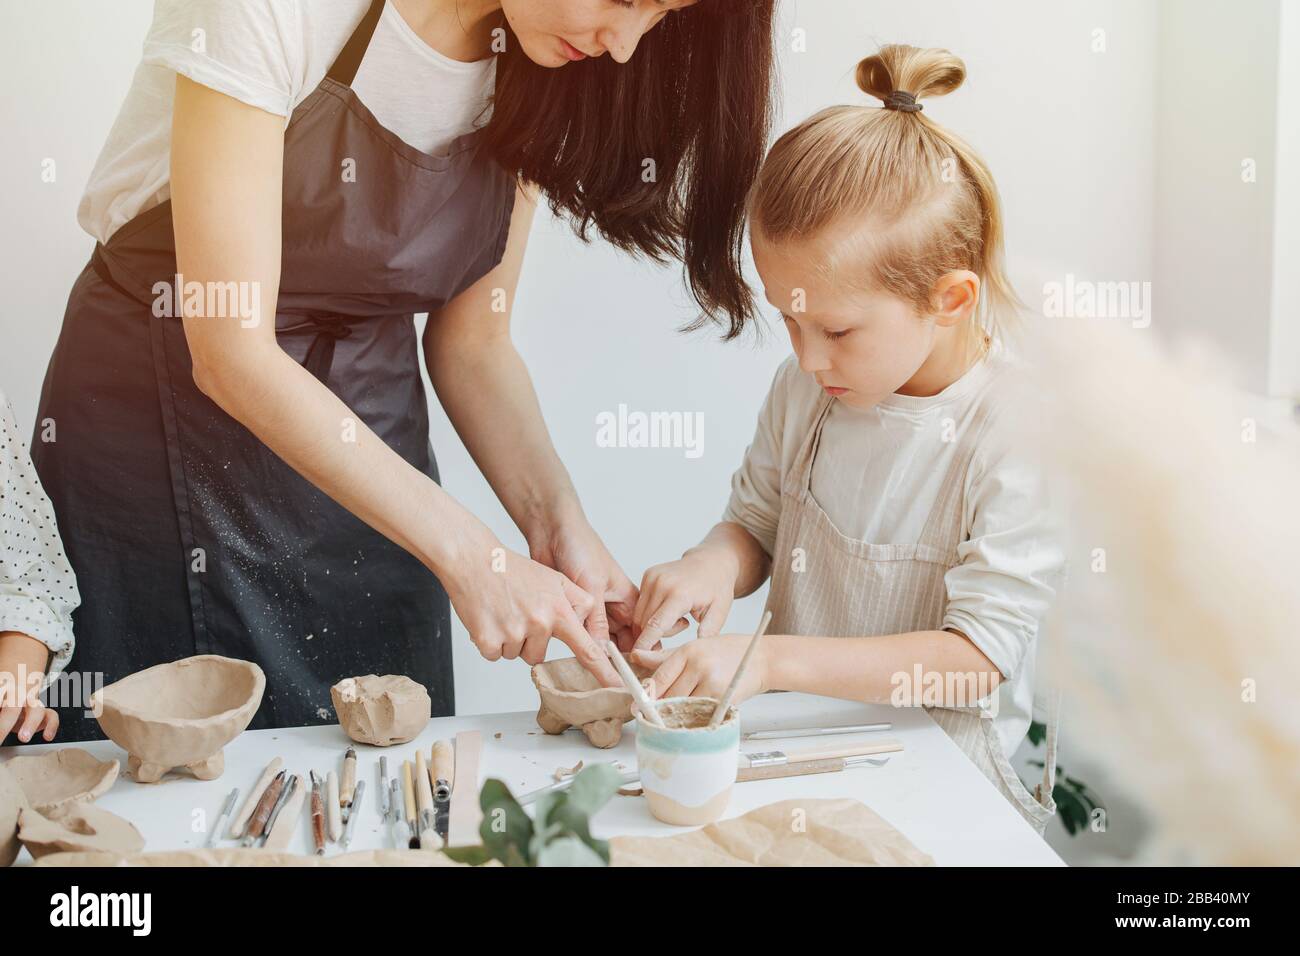 Close-up picture, master potter in an apron and a blond boy with long hair 7 years old, for a ceramics class Stock Photo